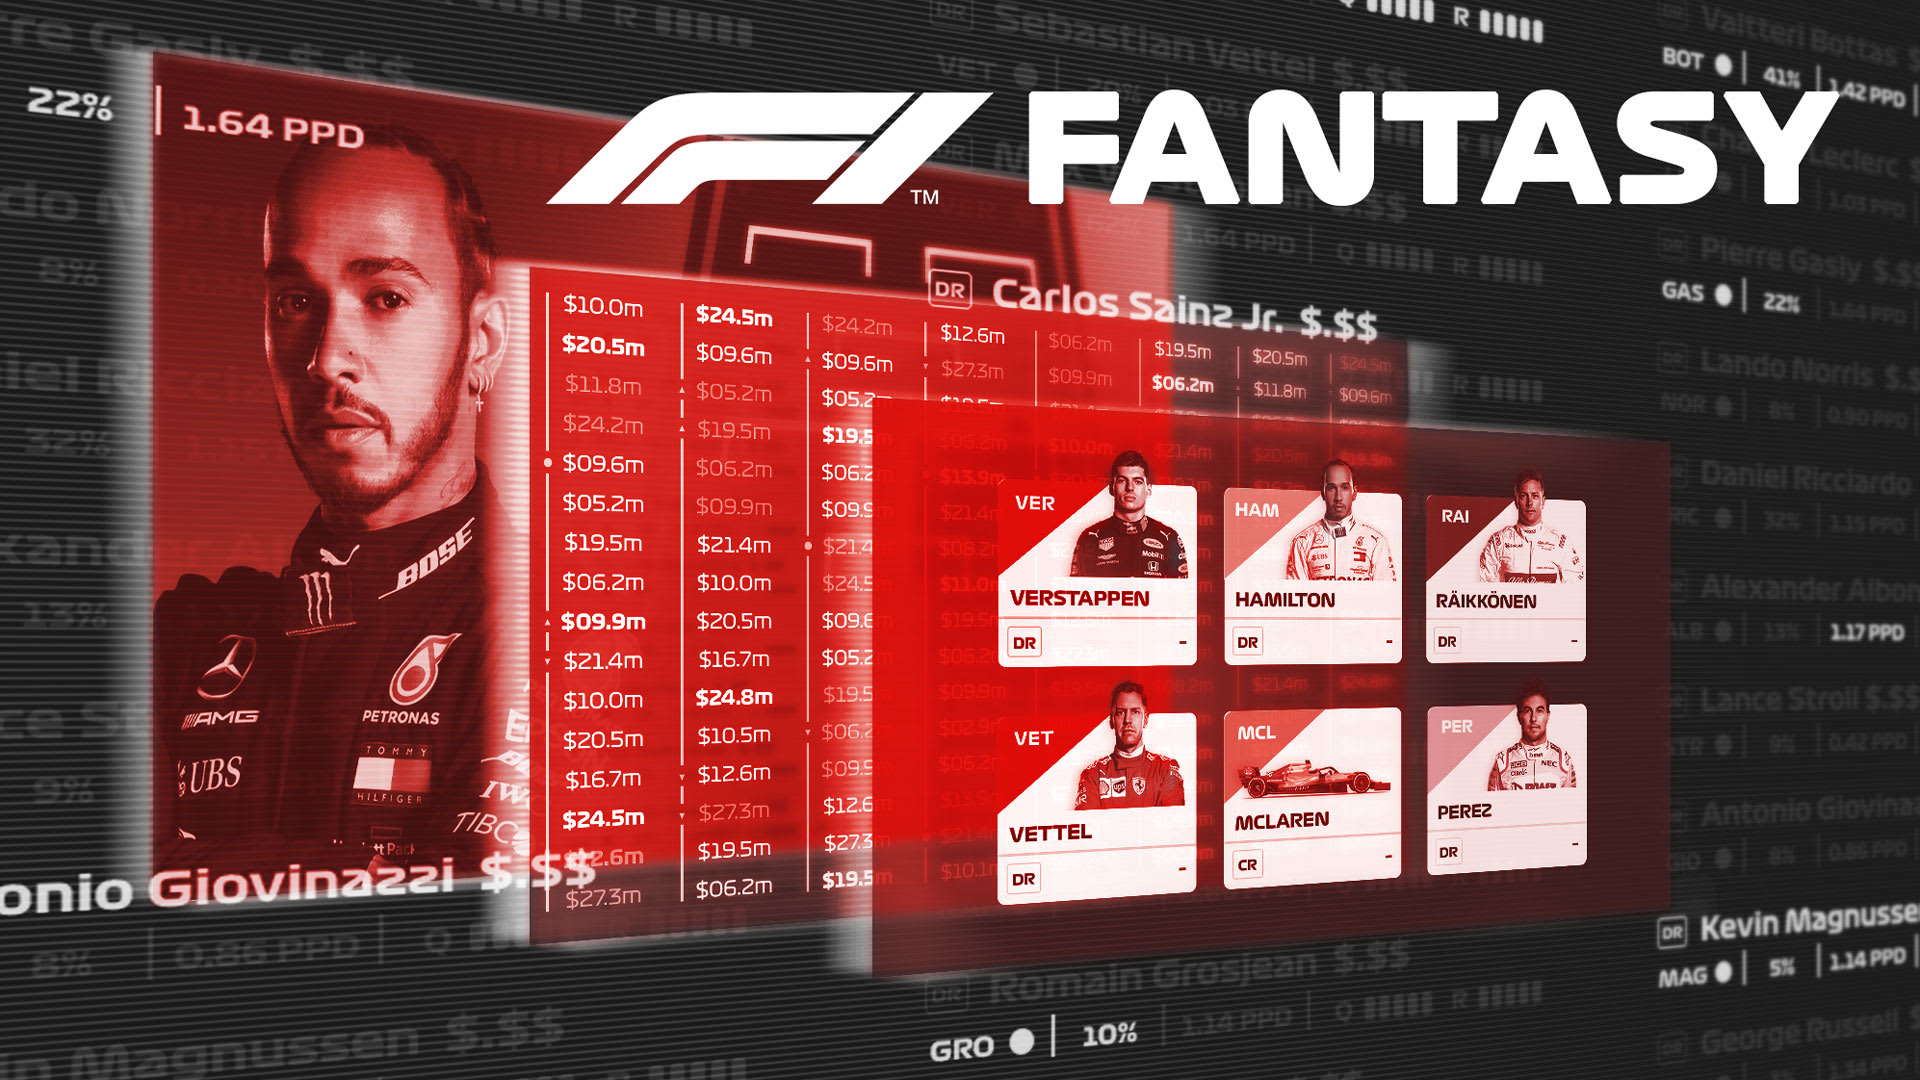 How to play F1 Fantasy plus the exciting new changes for 2021